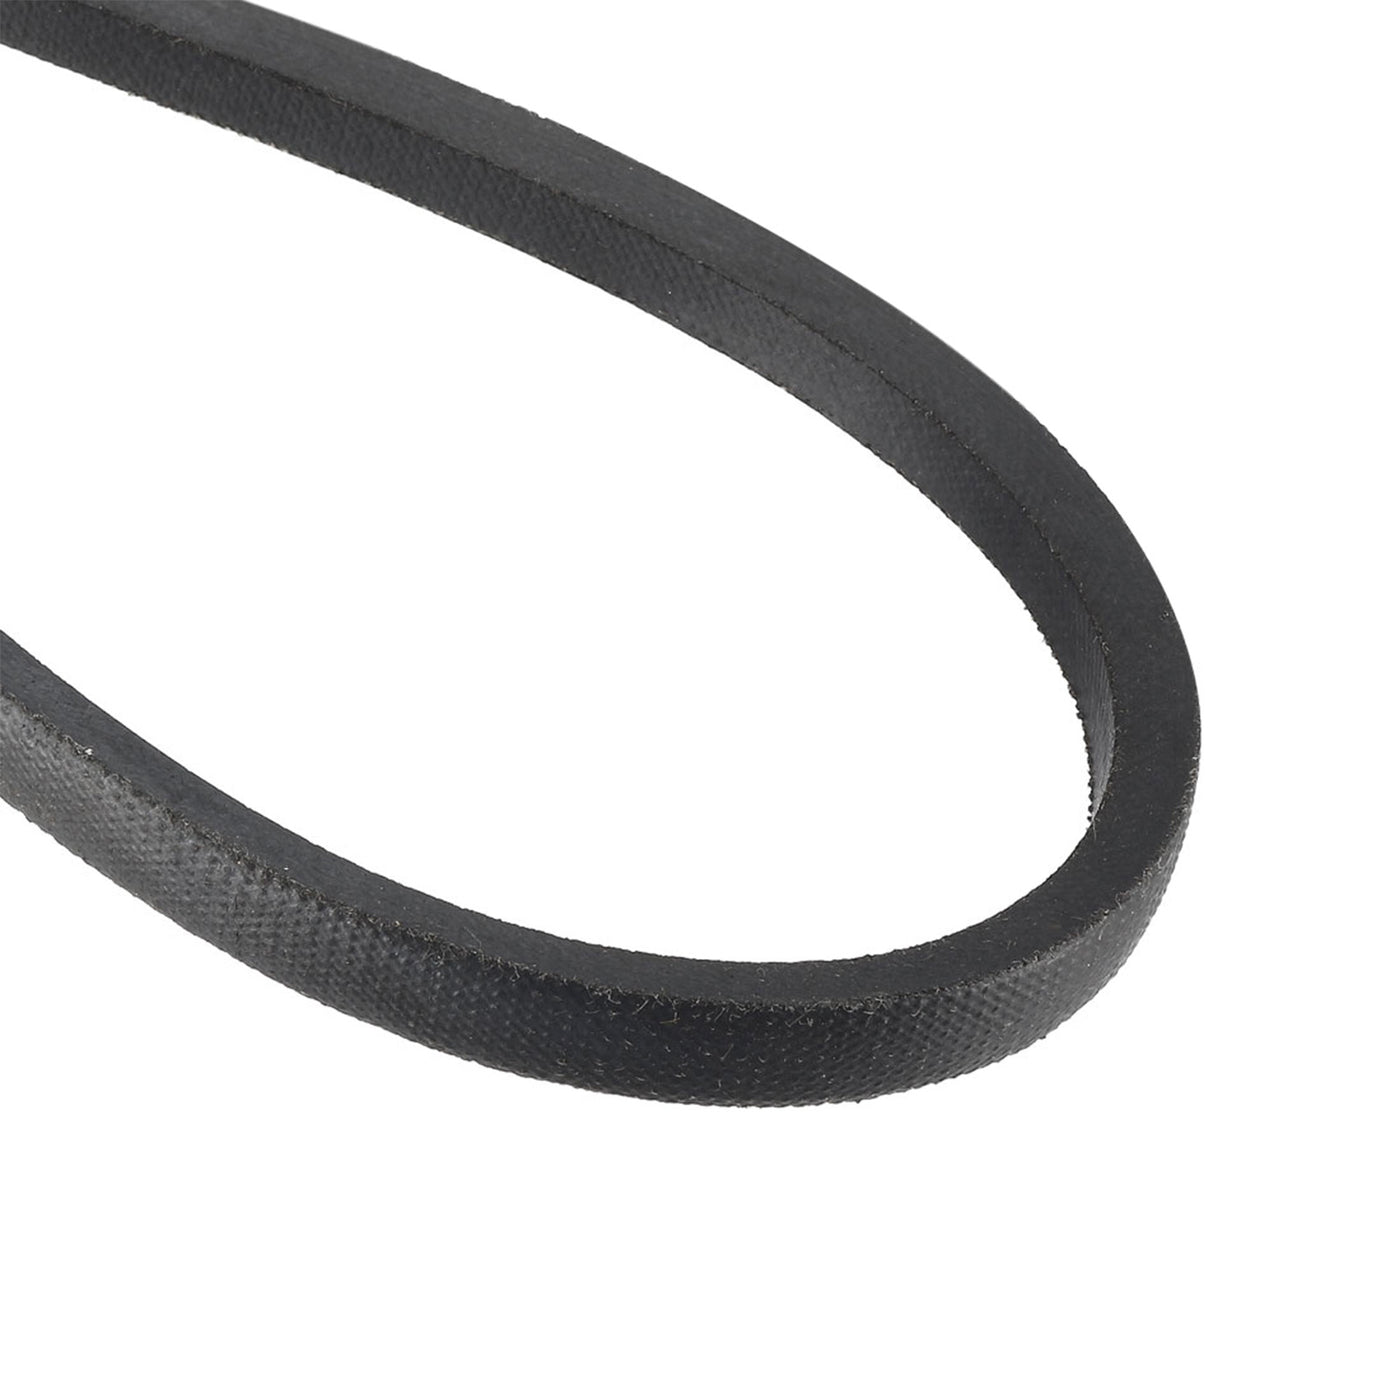 Uxcell Uxcell A940/A37 V-Belts 37" Inner Girth, A-Section Rubber Drive Belt